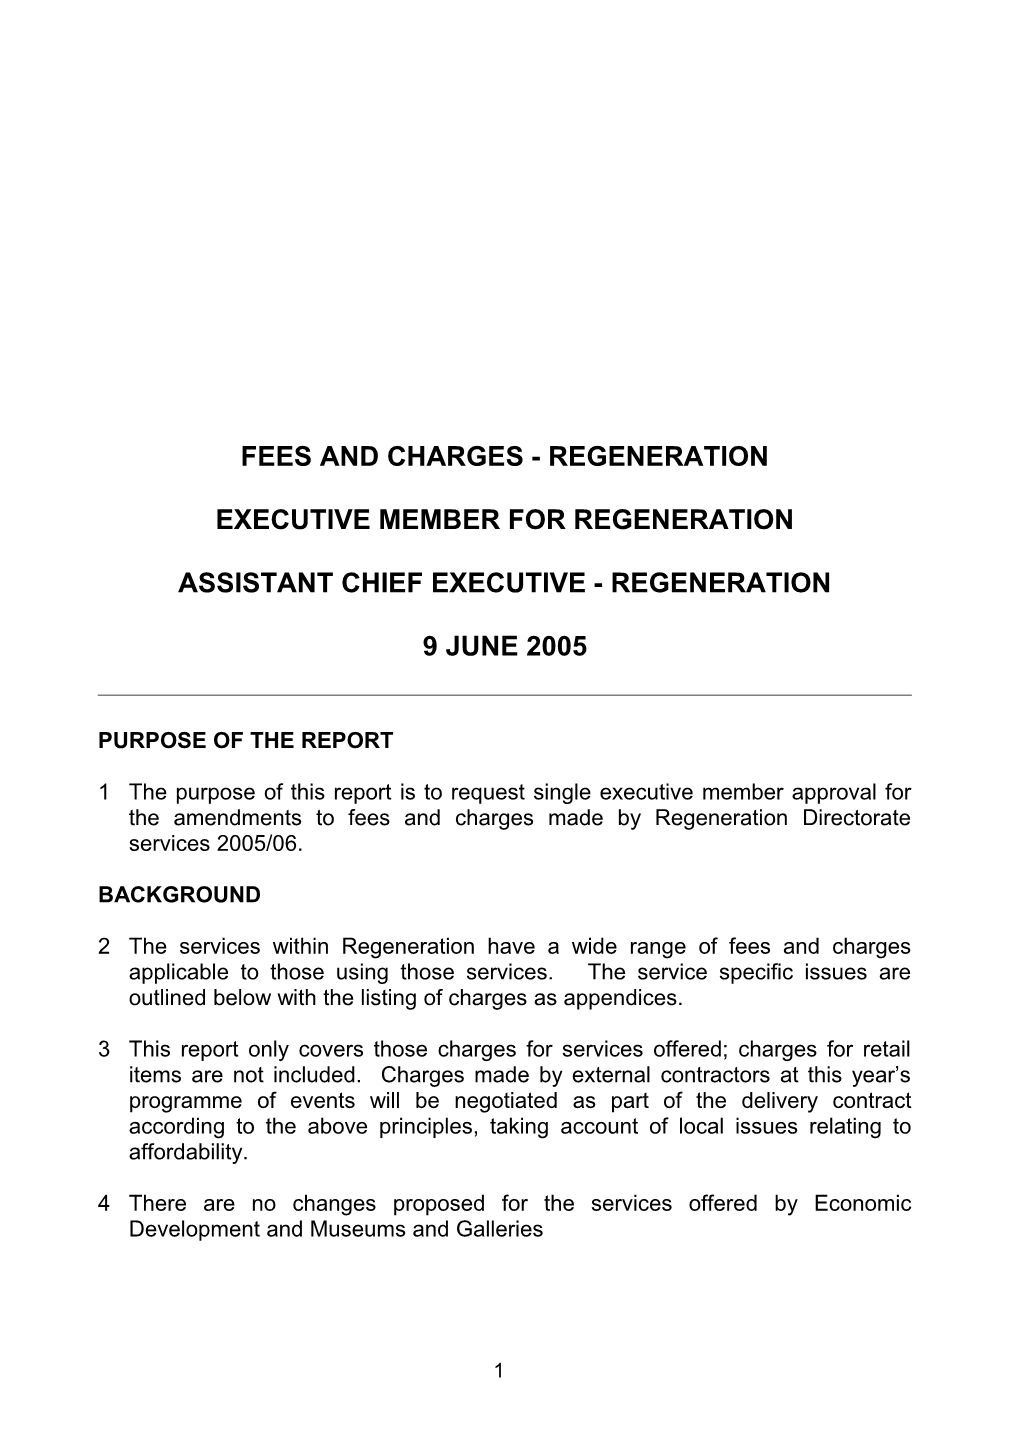 Fees and Charges - Regeneration